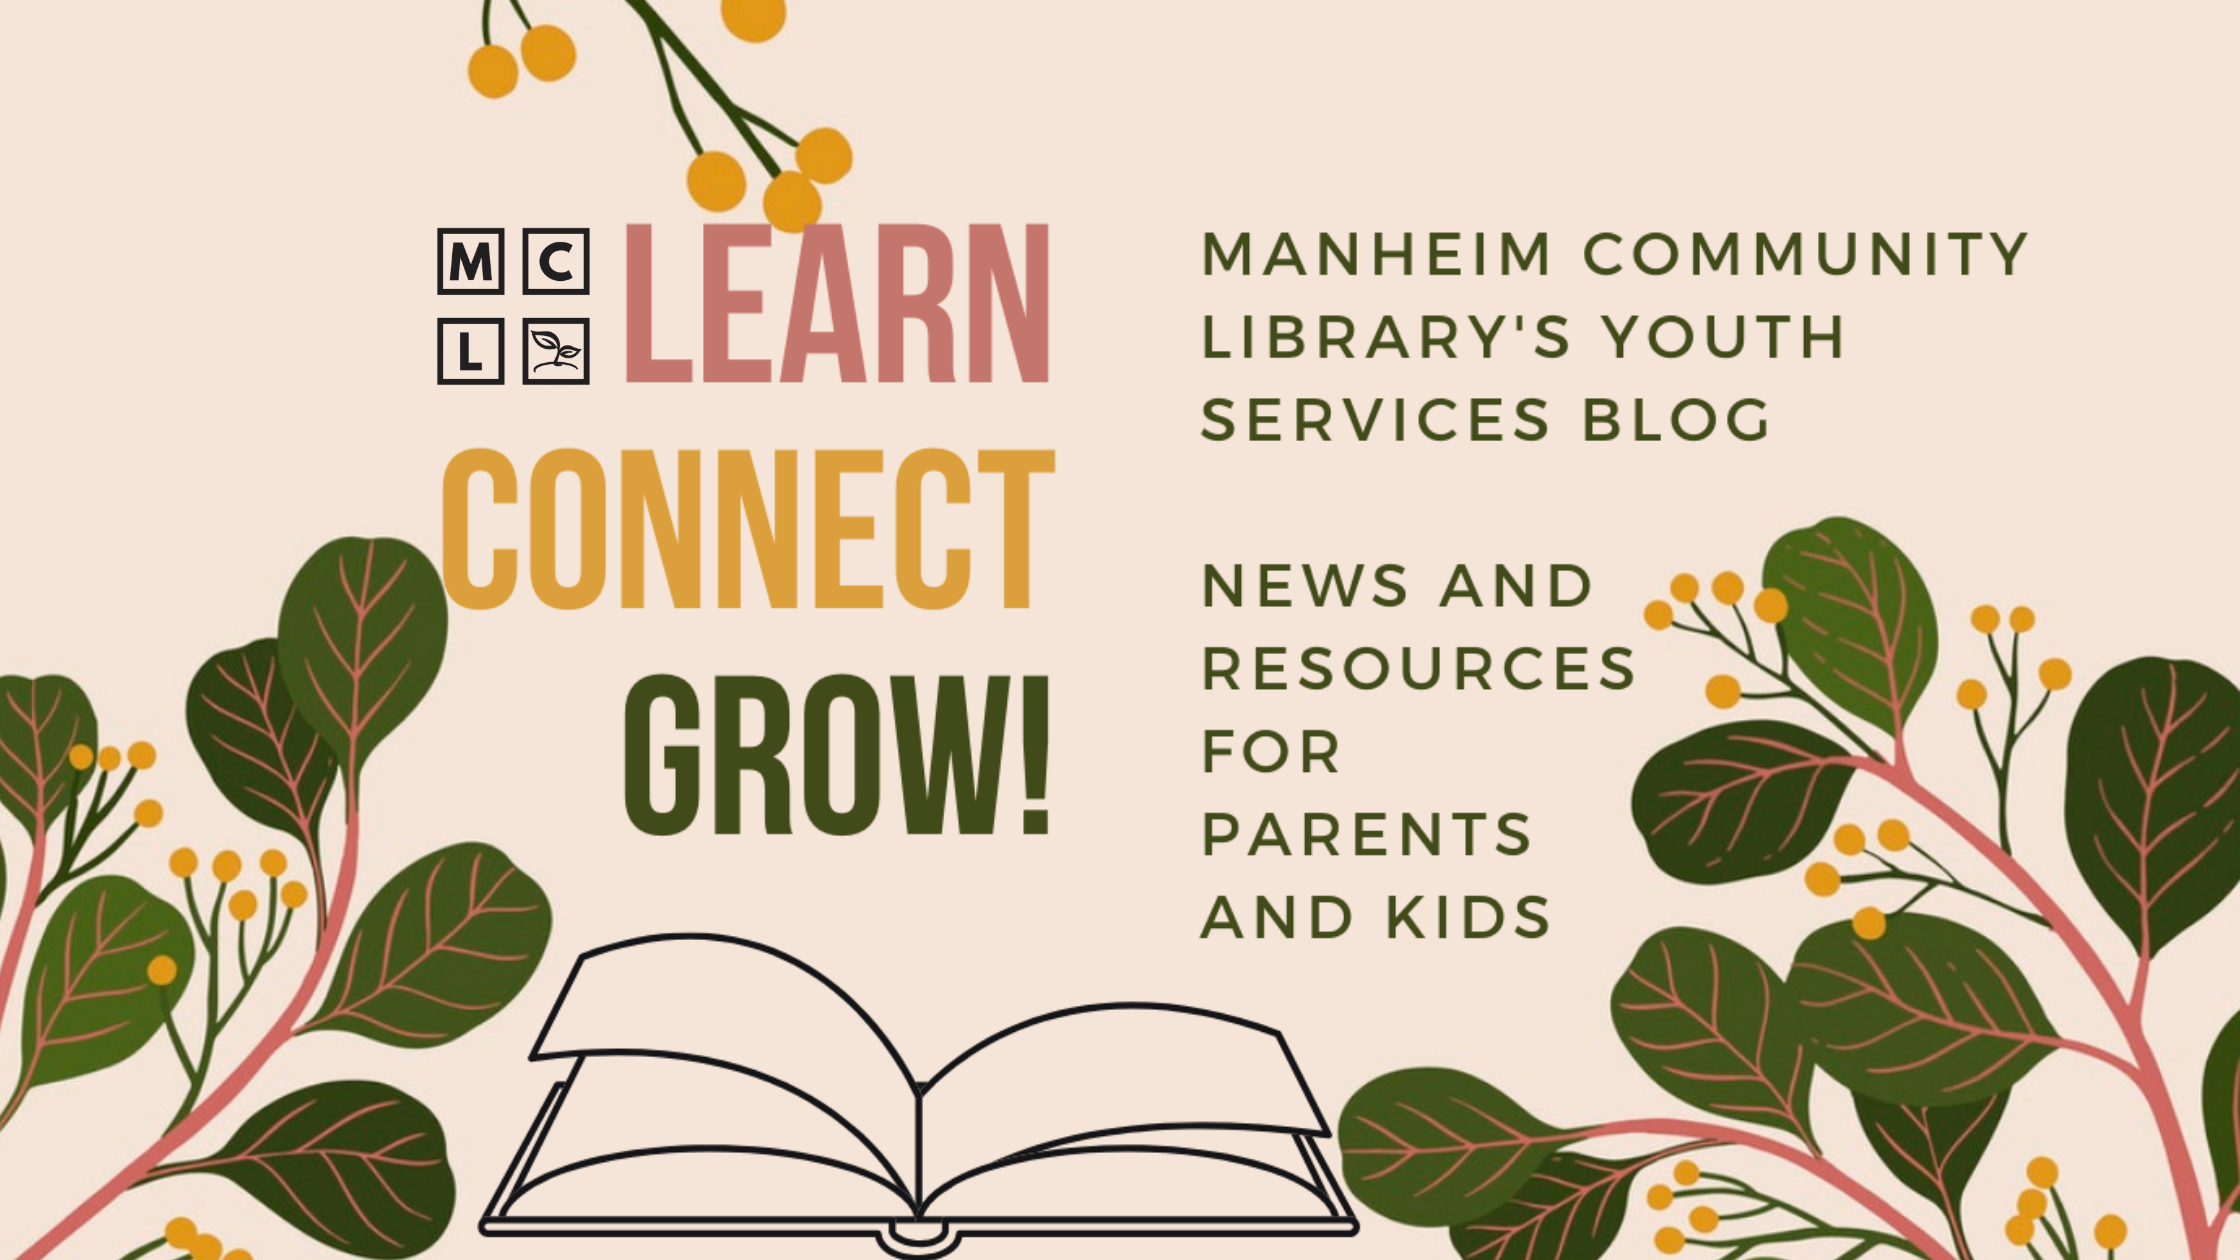 Manheim Community Library Youth Services Blog